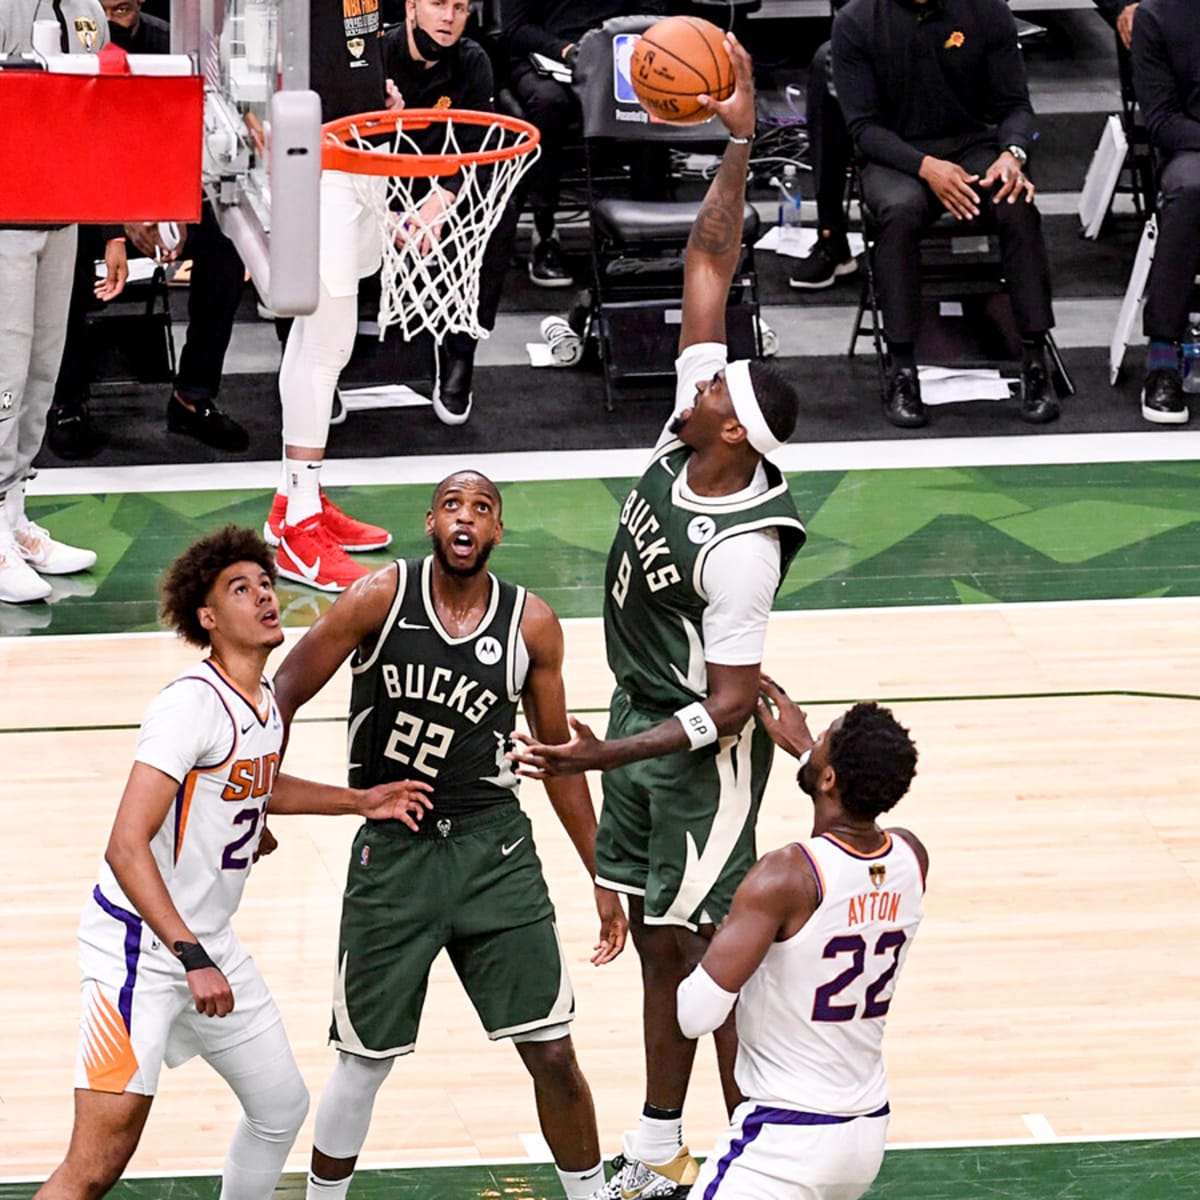 astronomie Pennenvriend Bestudeer NBA Finals: Bobby Portis is the Bucks' unsung hero - Sports Illustrated